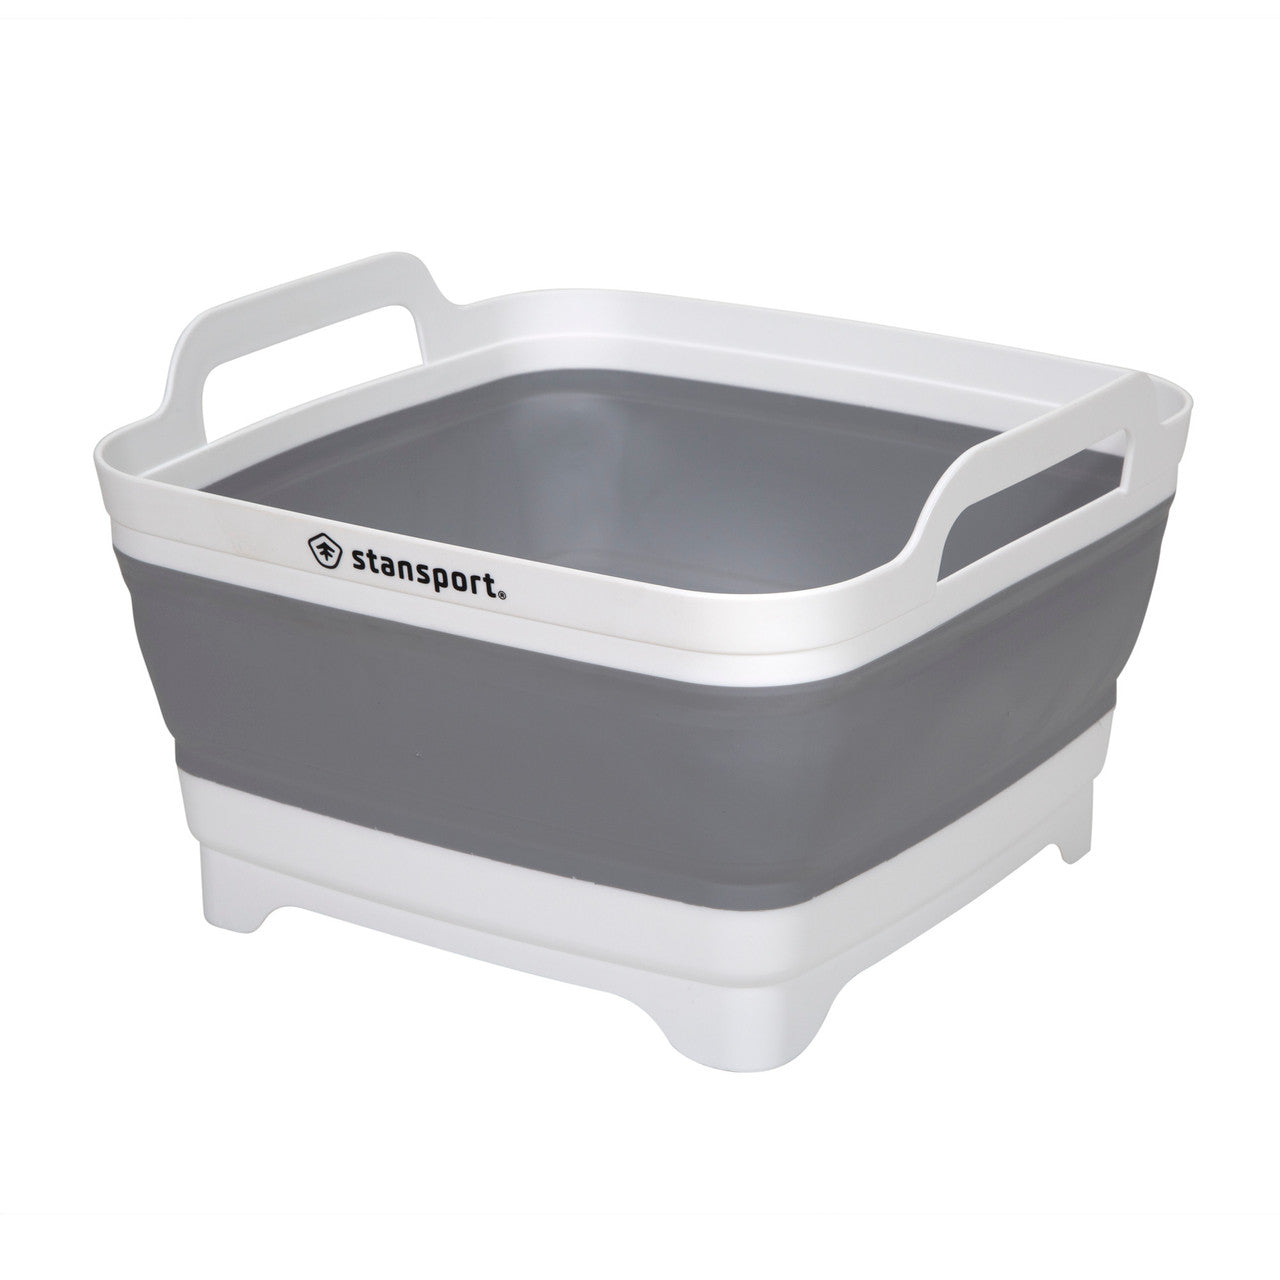 Stansport Collapsible Camp Sink